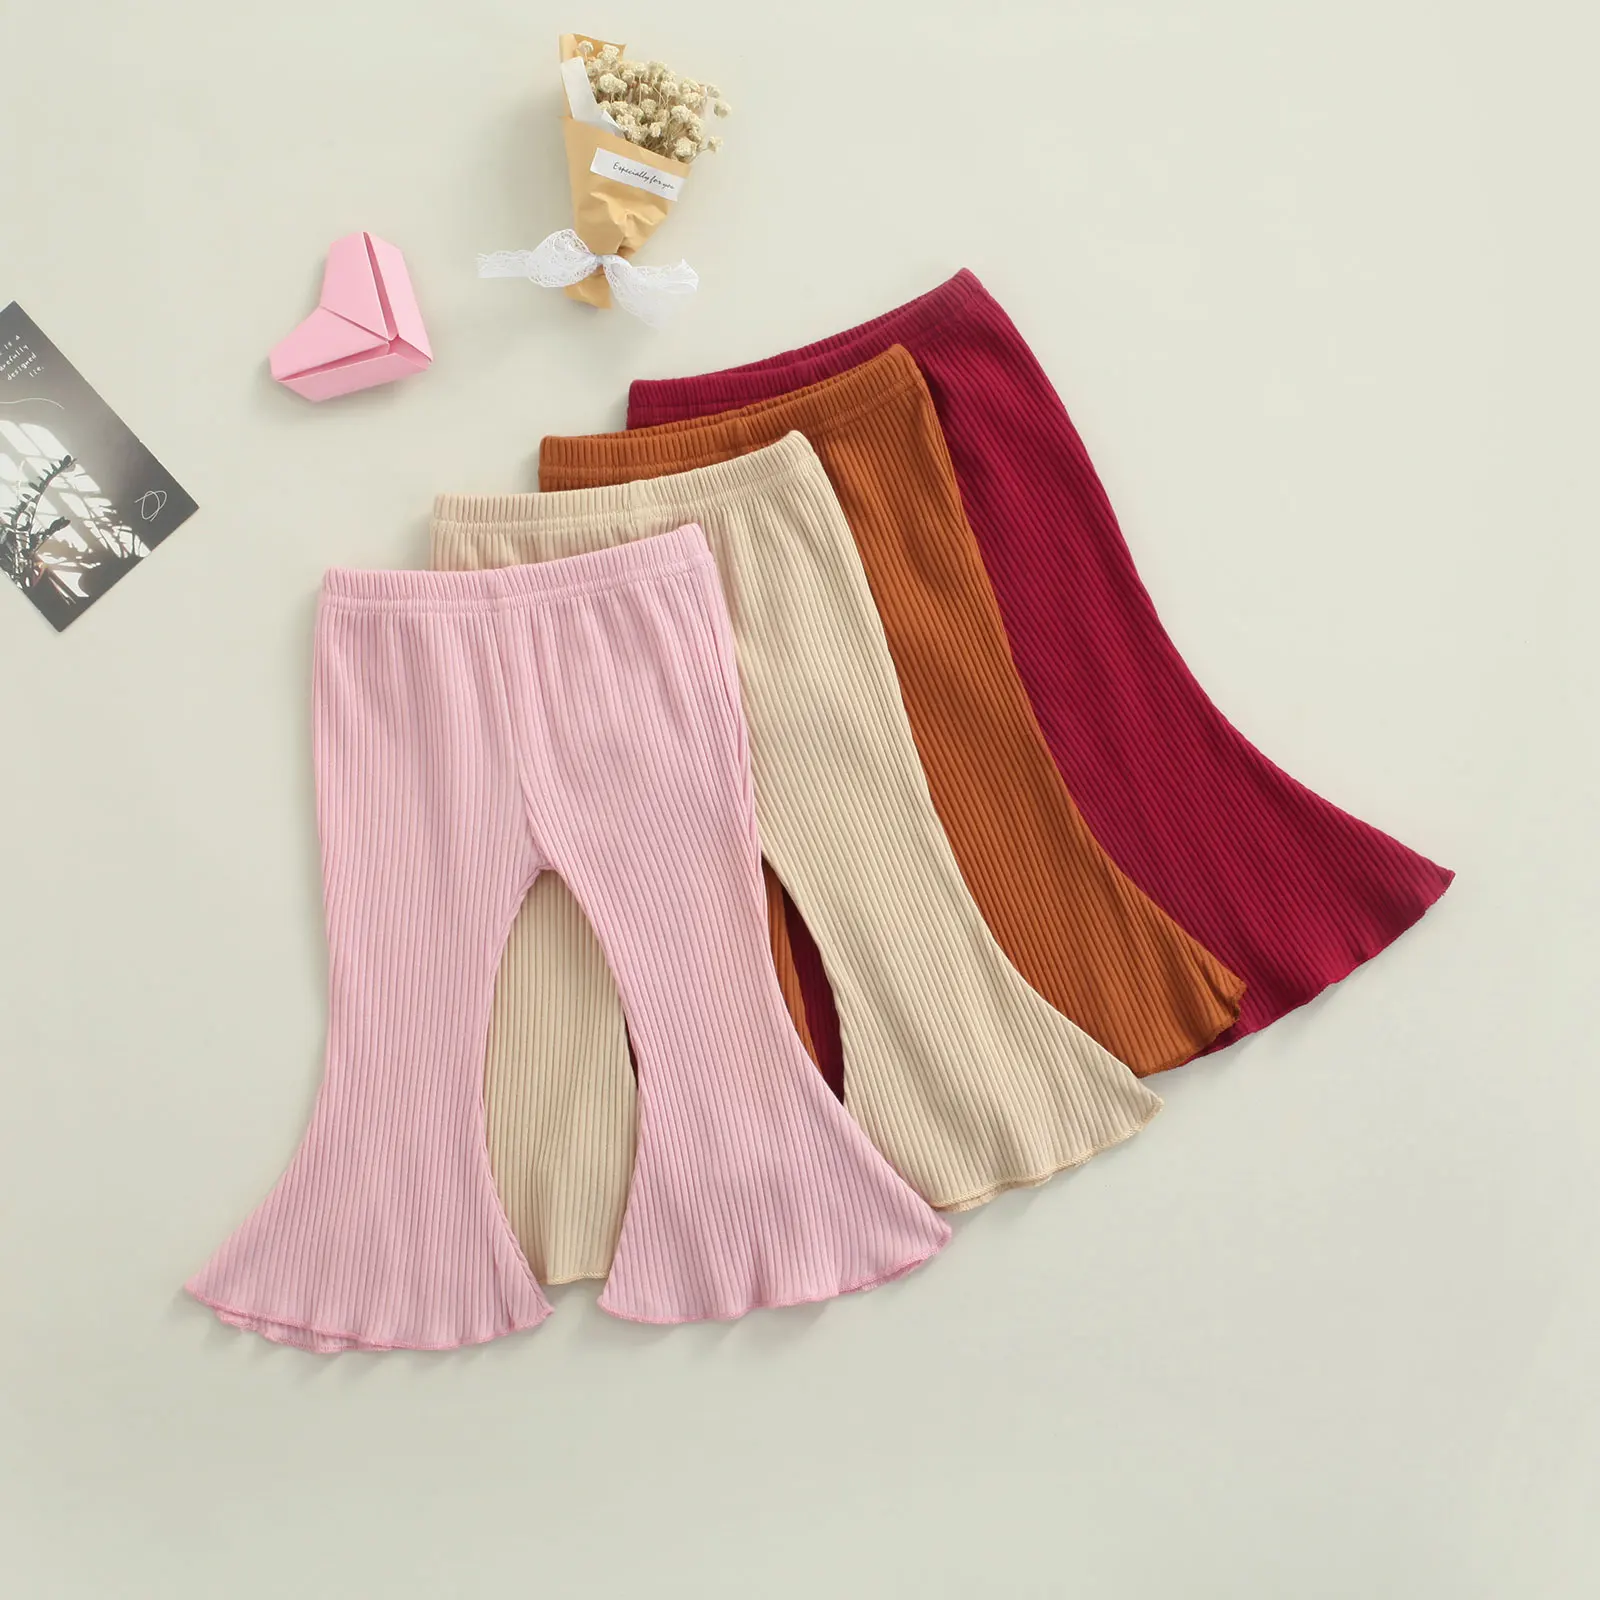 Baby Girls Casual Trousers, Toddler Solid Color Elastic Waist Flared Pants, Wine Red/ Light Khaki/ Pink/ Brown, 3-24 Months